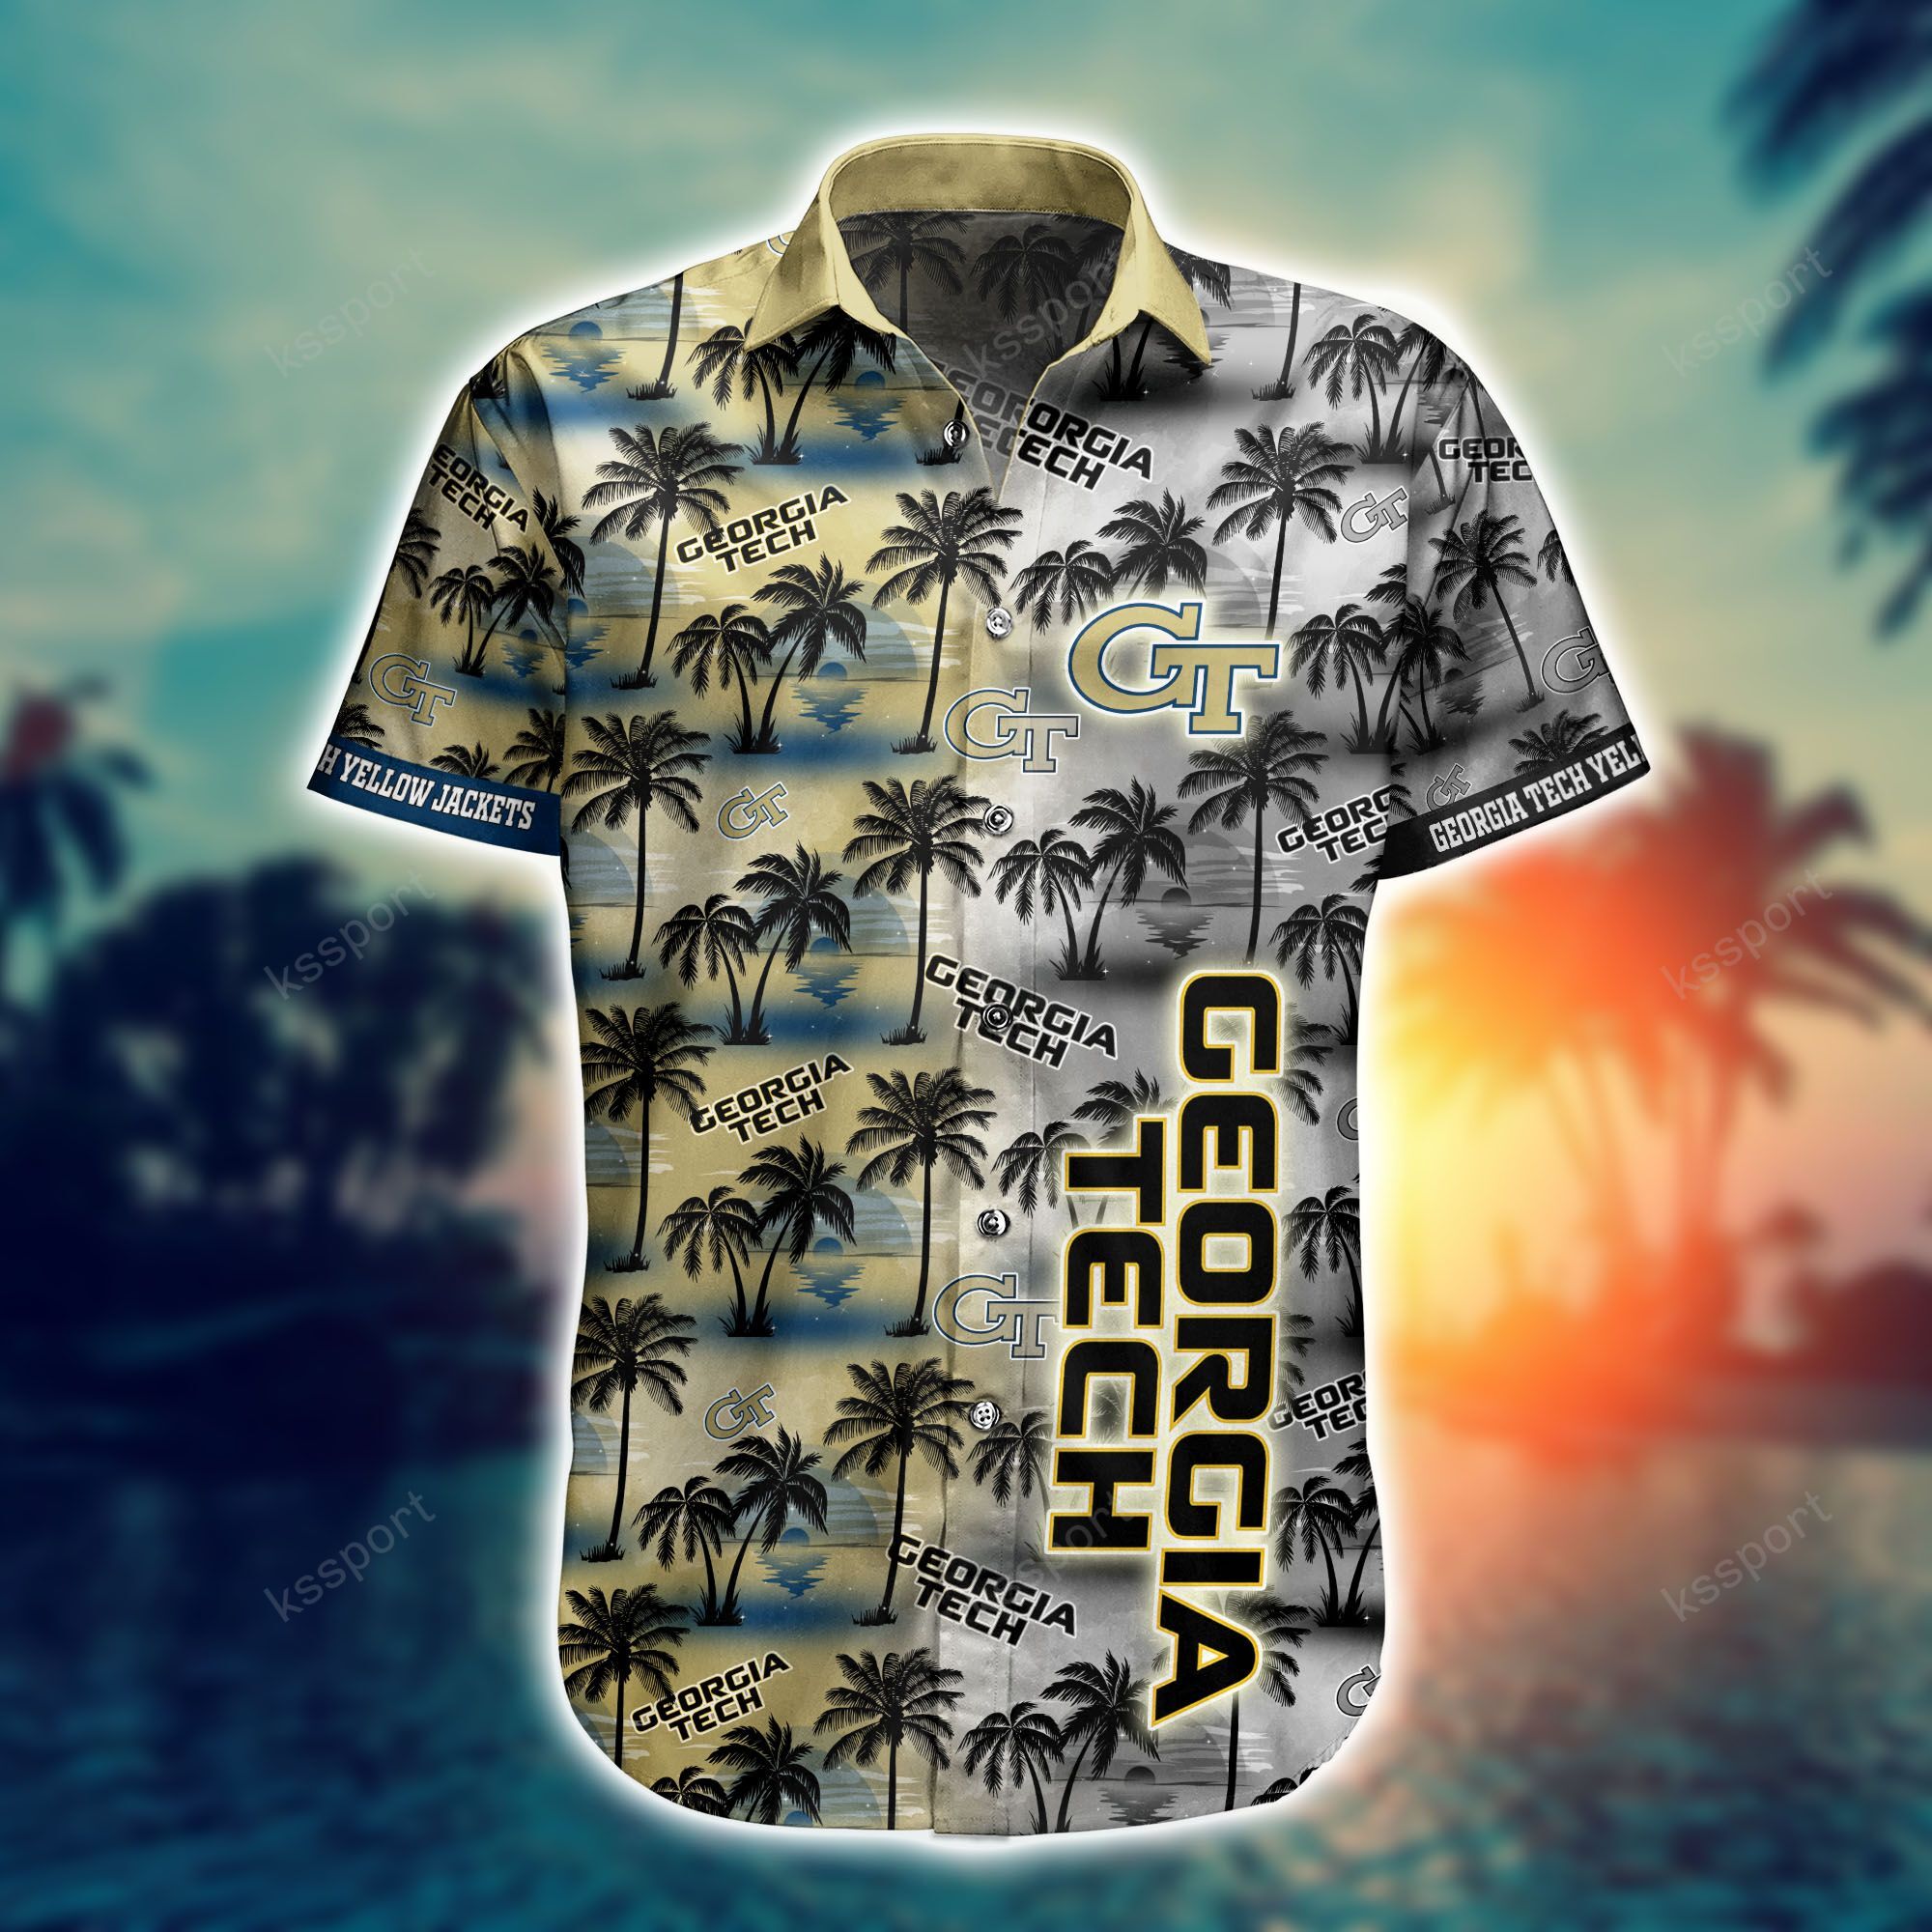 Top cool Hawaiian shirt 2022 - Make sure you get yours today before they run out! 136